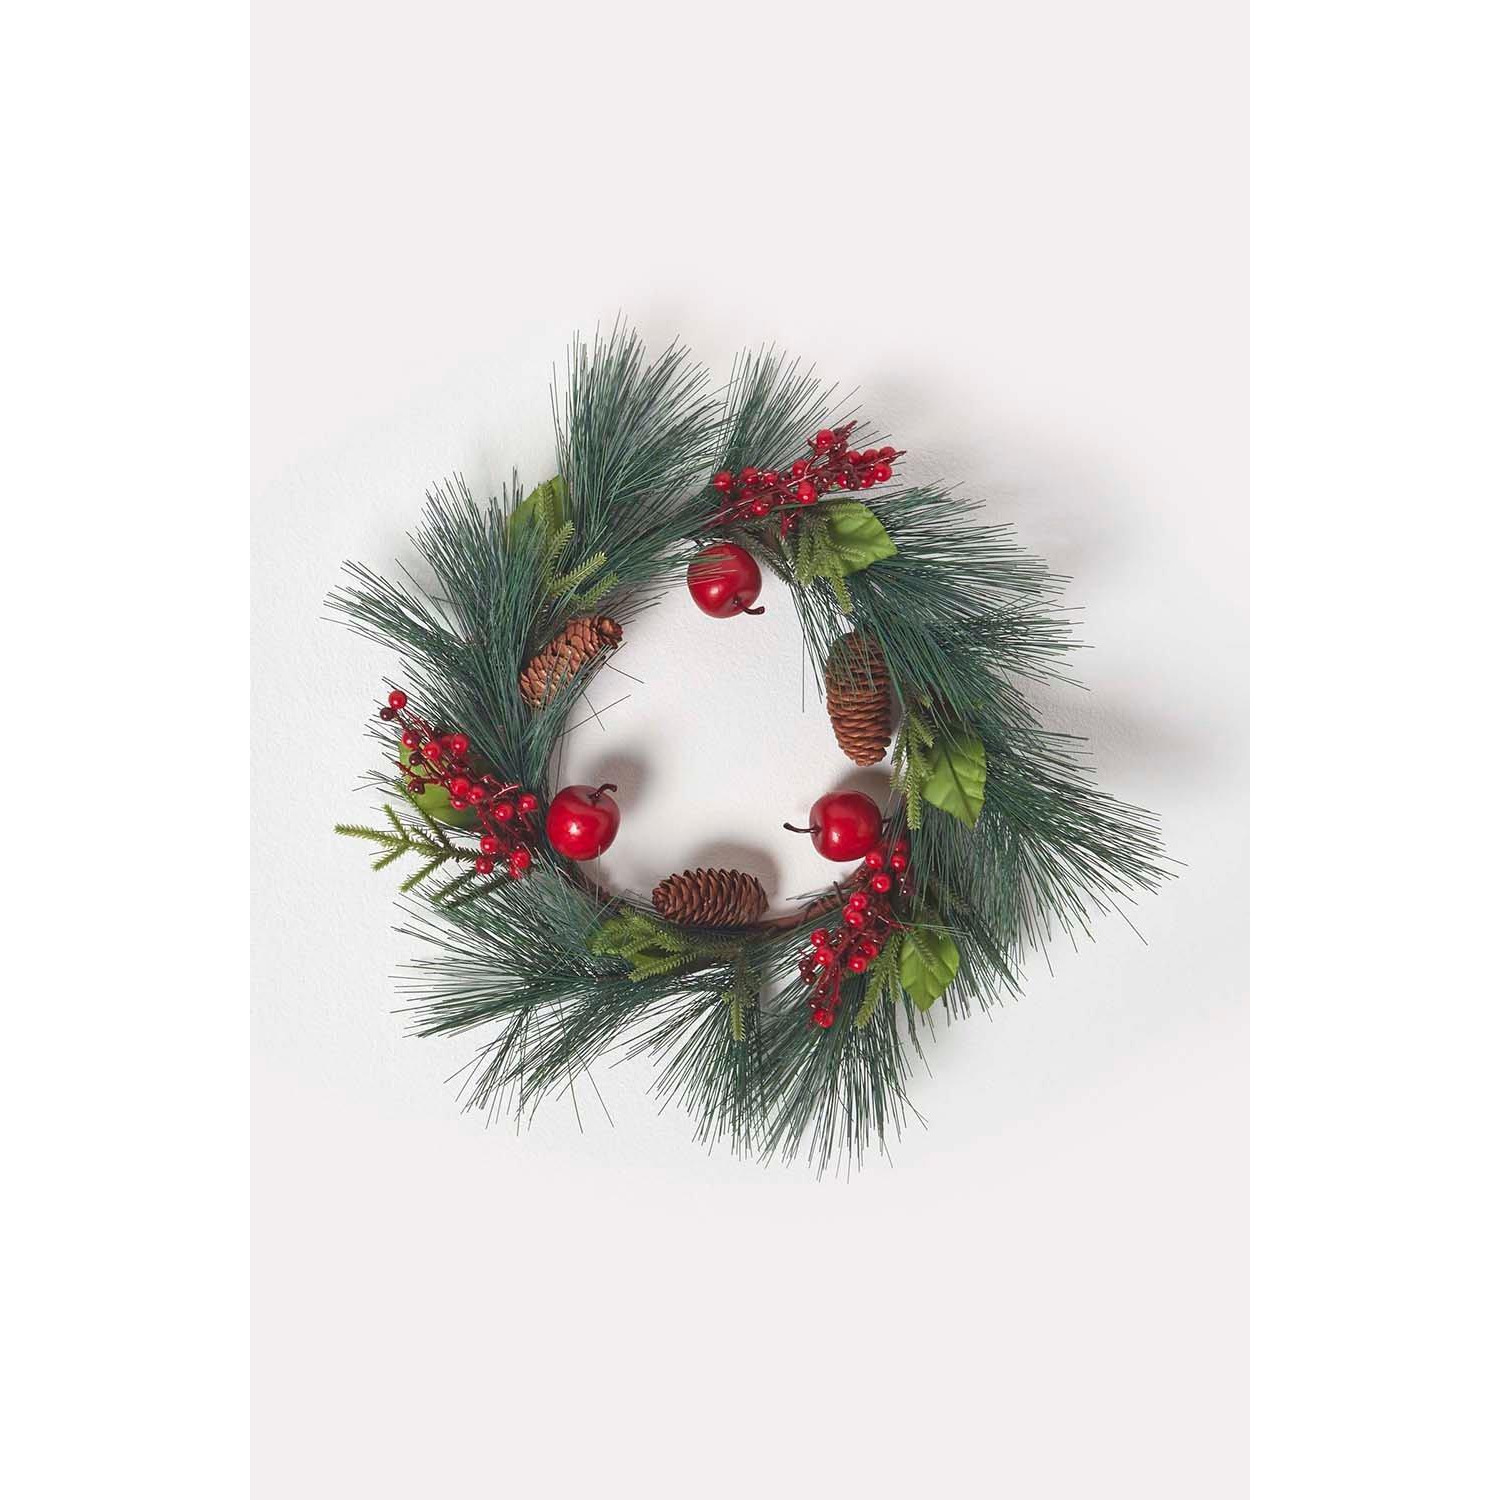 Red Apple and Berries Christmas Wreath - image 1